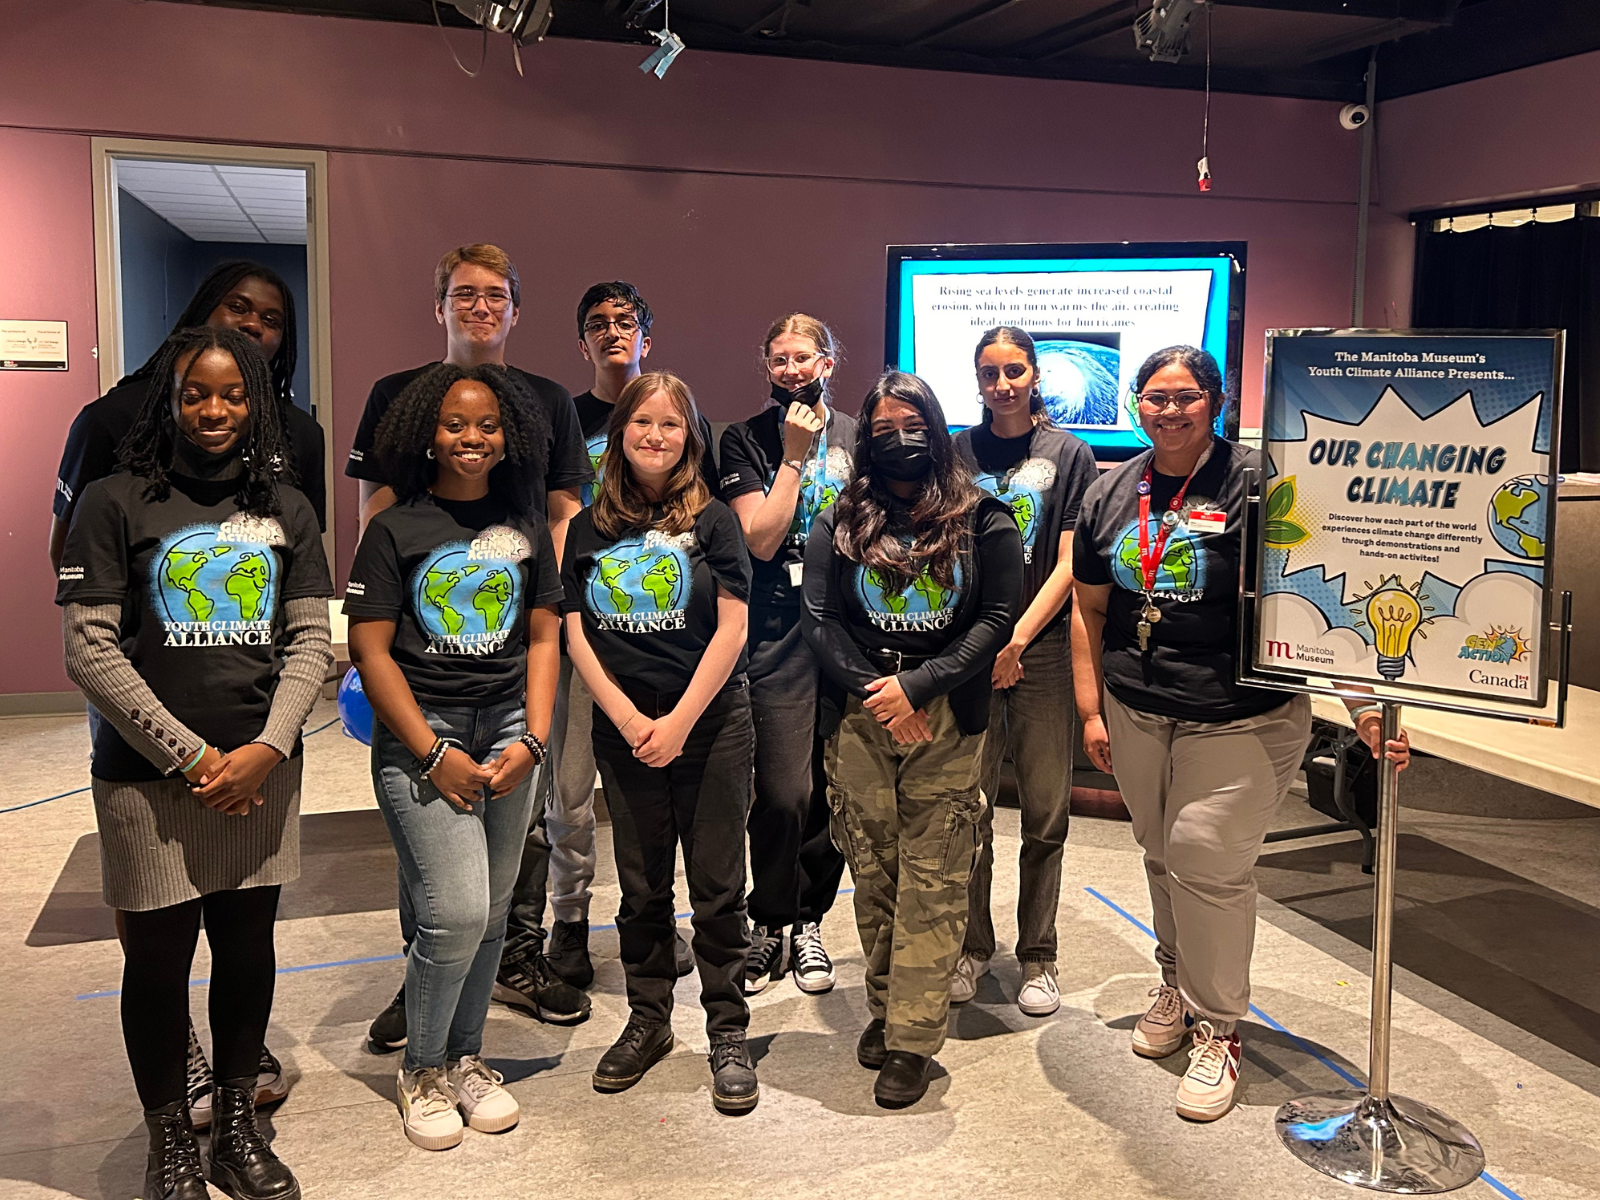 A group of nine youth and a Museum staff member smiling together. All are wearing matching t-shirts with an illustrated globe and the words “GenAction! / Youth Climate / Alliance”. On the right side of the group is a sign reading, “Our Changing Climate”.